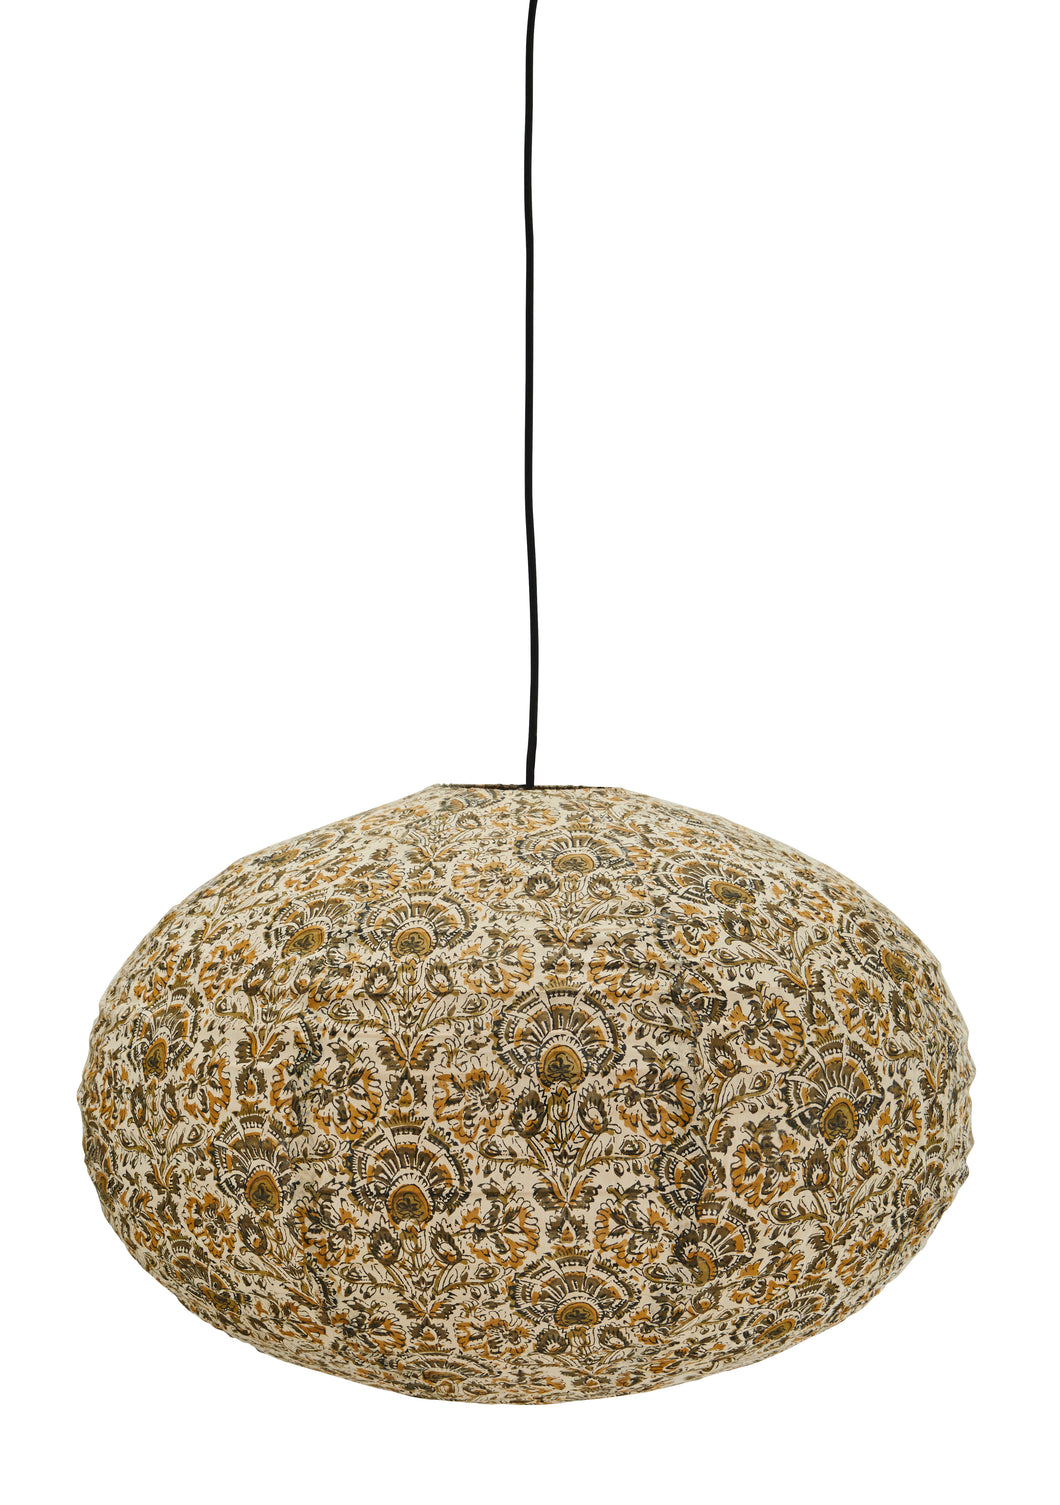 Printed cotton ceiling lamshade in olive & mustard